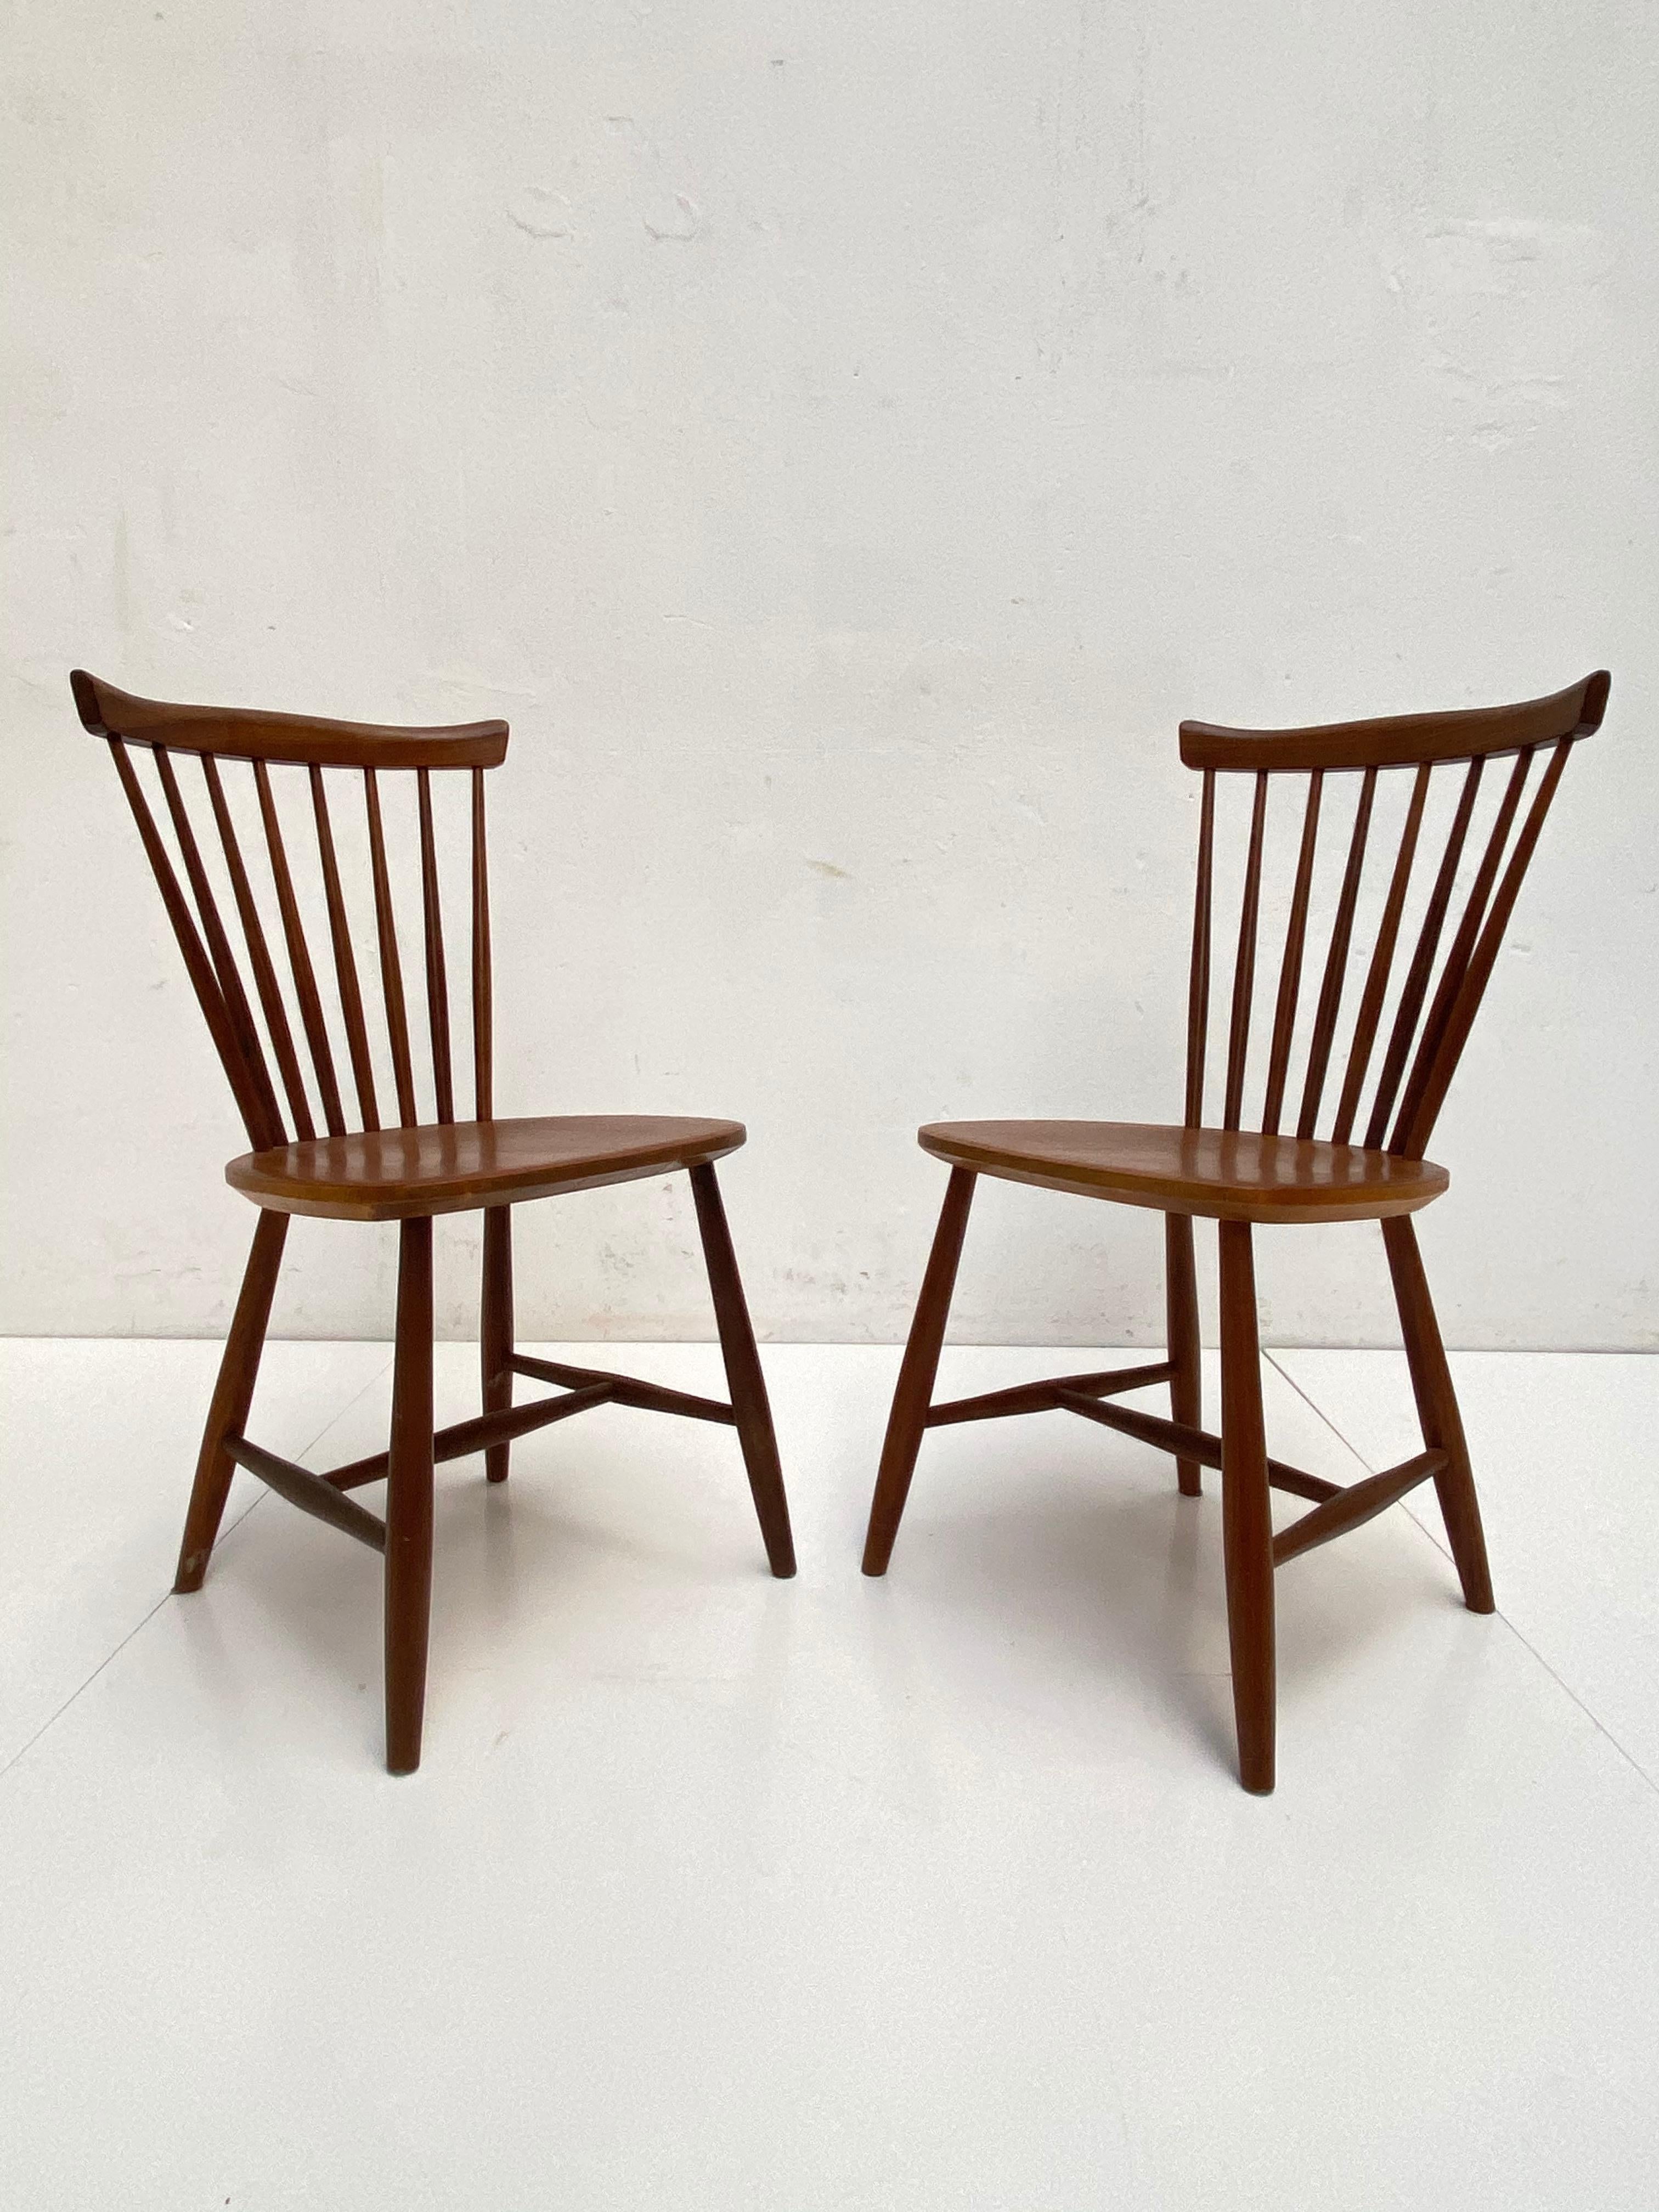 Pair of solid teak wood side chairs by Swedish designer Lena Larson for Nestor Sweden, distributed in The Netherlands by Pastoe in the 1950s

The chairs are in a remarkable good original vintage condition with a nice ageing patina

They are